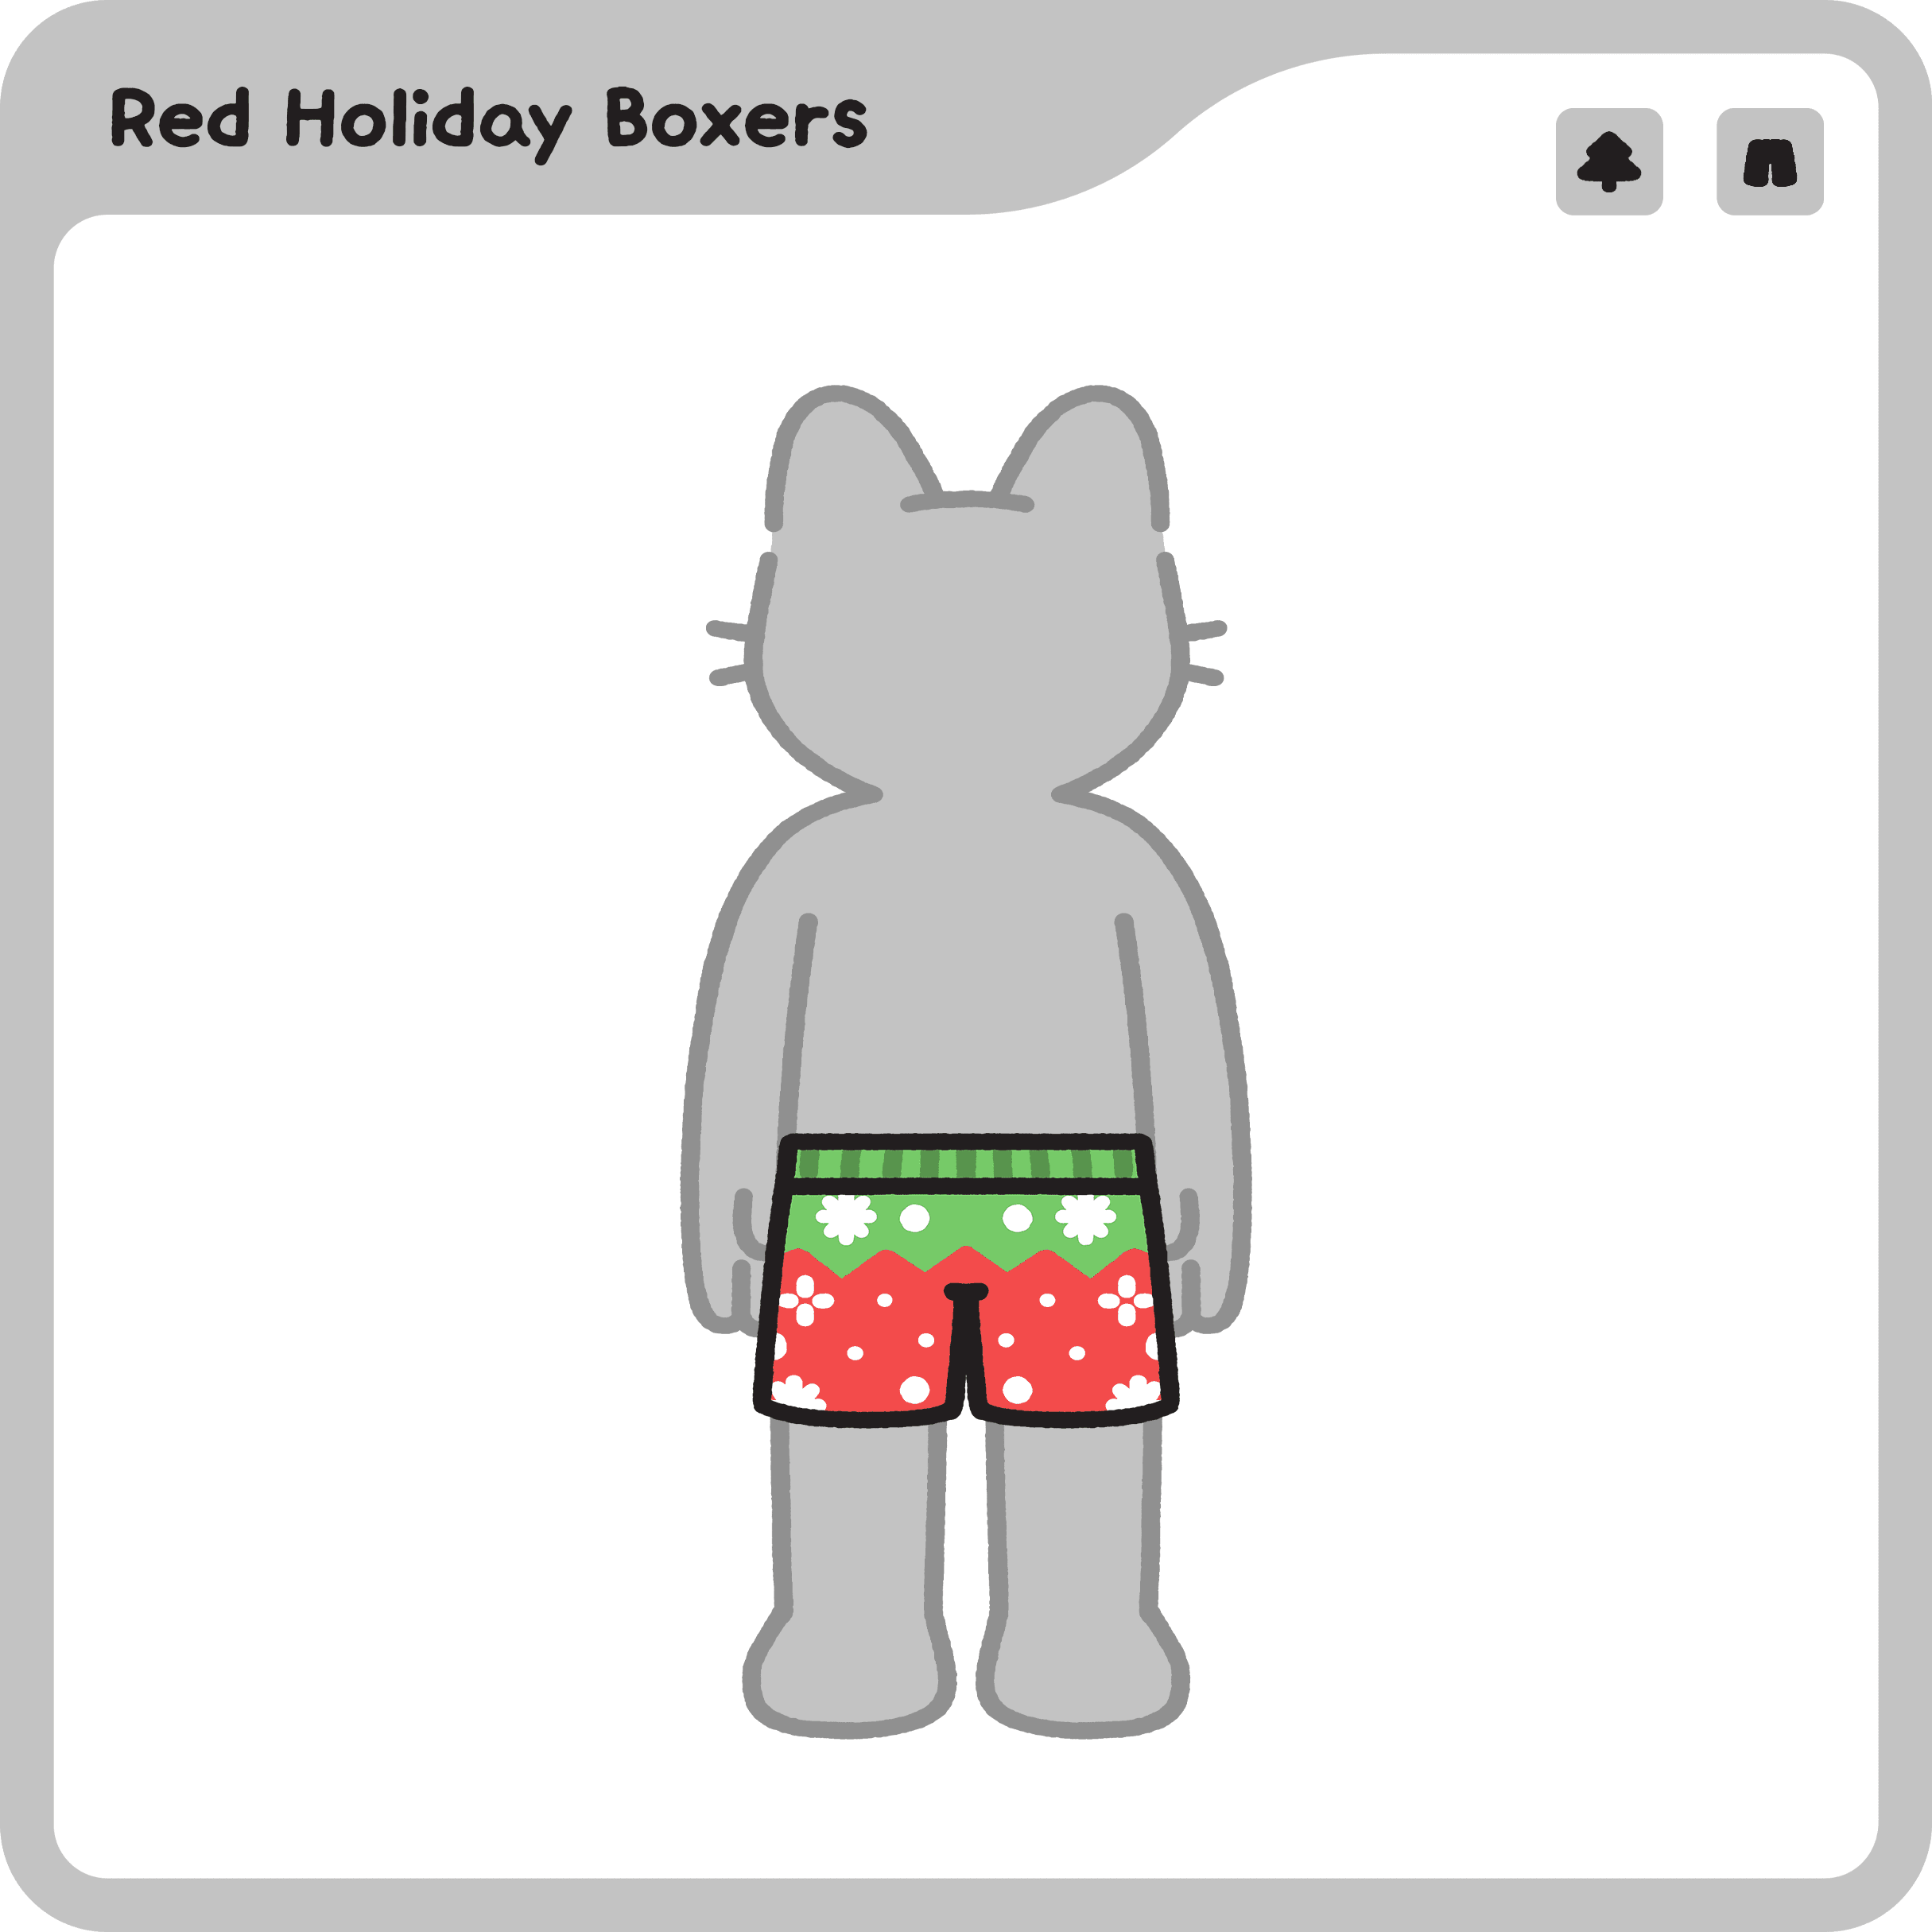 Red Holiday Boxers